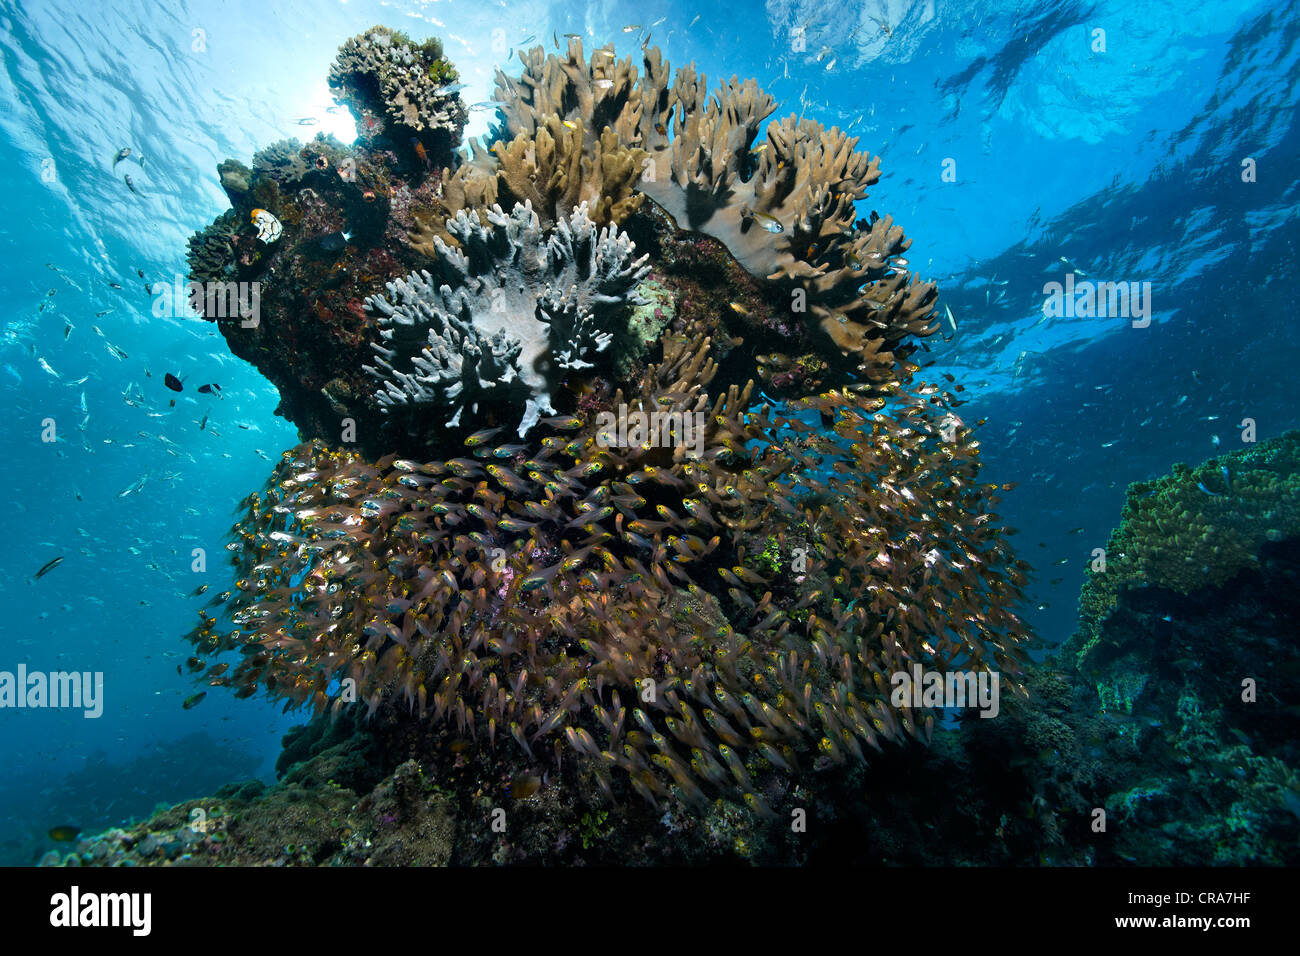 School of Pigmy Sweepers (Parapriacanthus ransonneti), seeking shelter under coral colony in coral reef, Great Barrier Reef Stock Photo